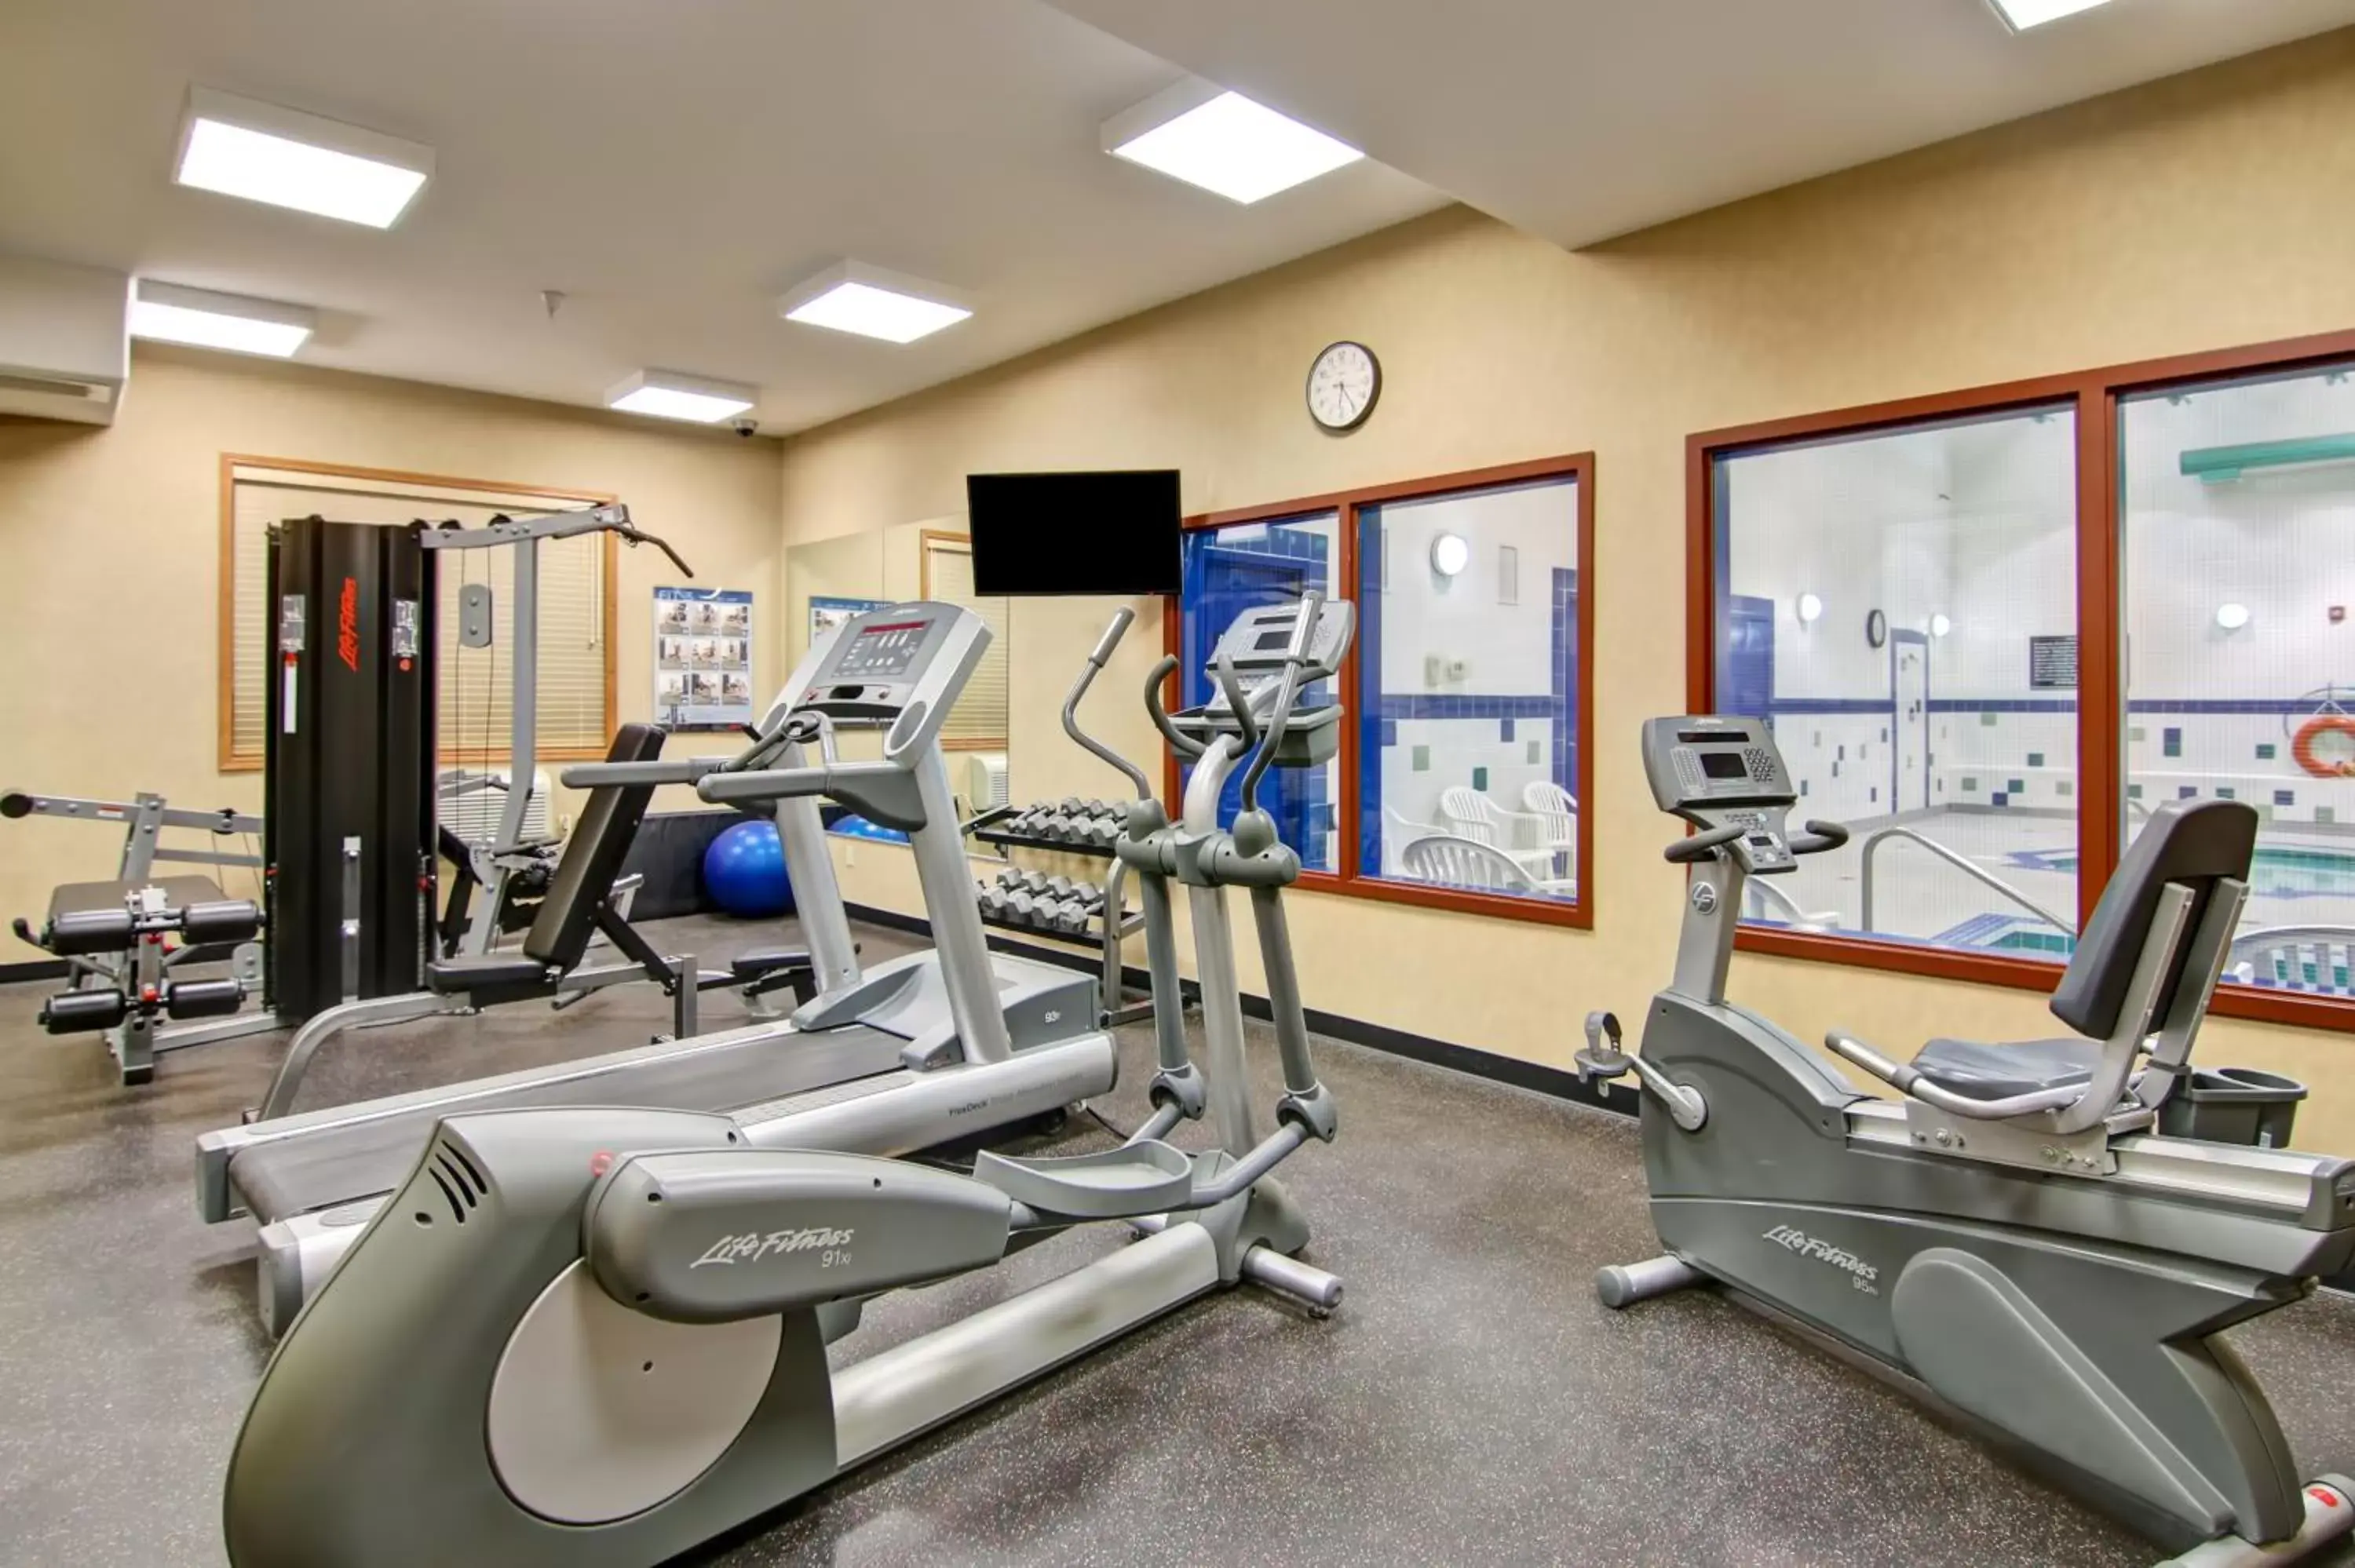 Fitness centre/facilities, Fitness Center/Facilities in Canalta Stettler